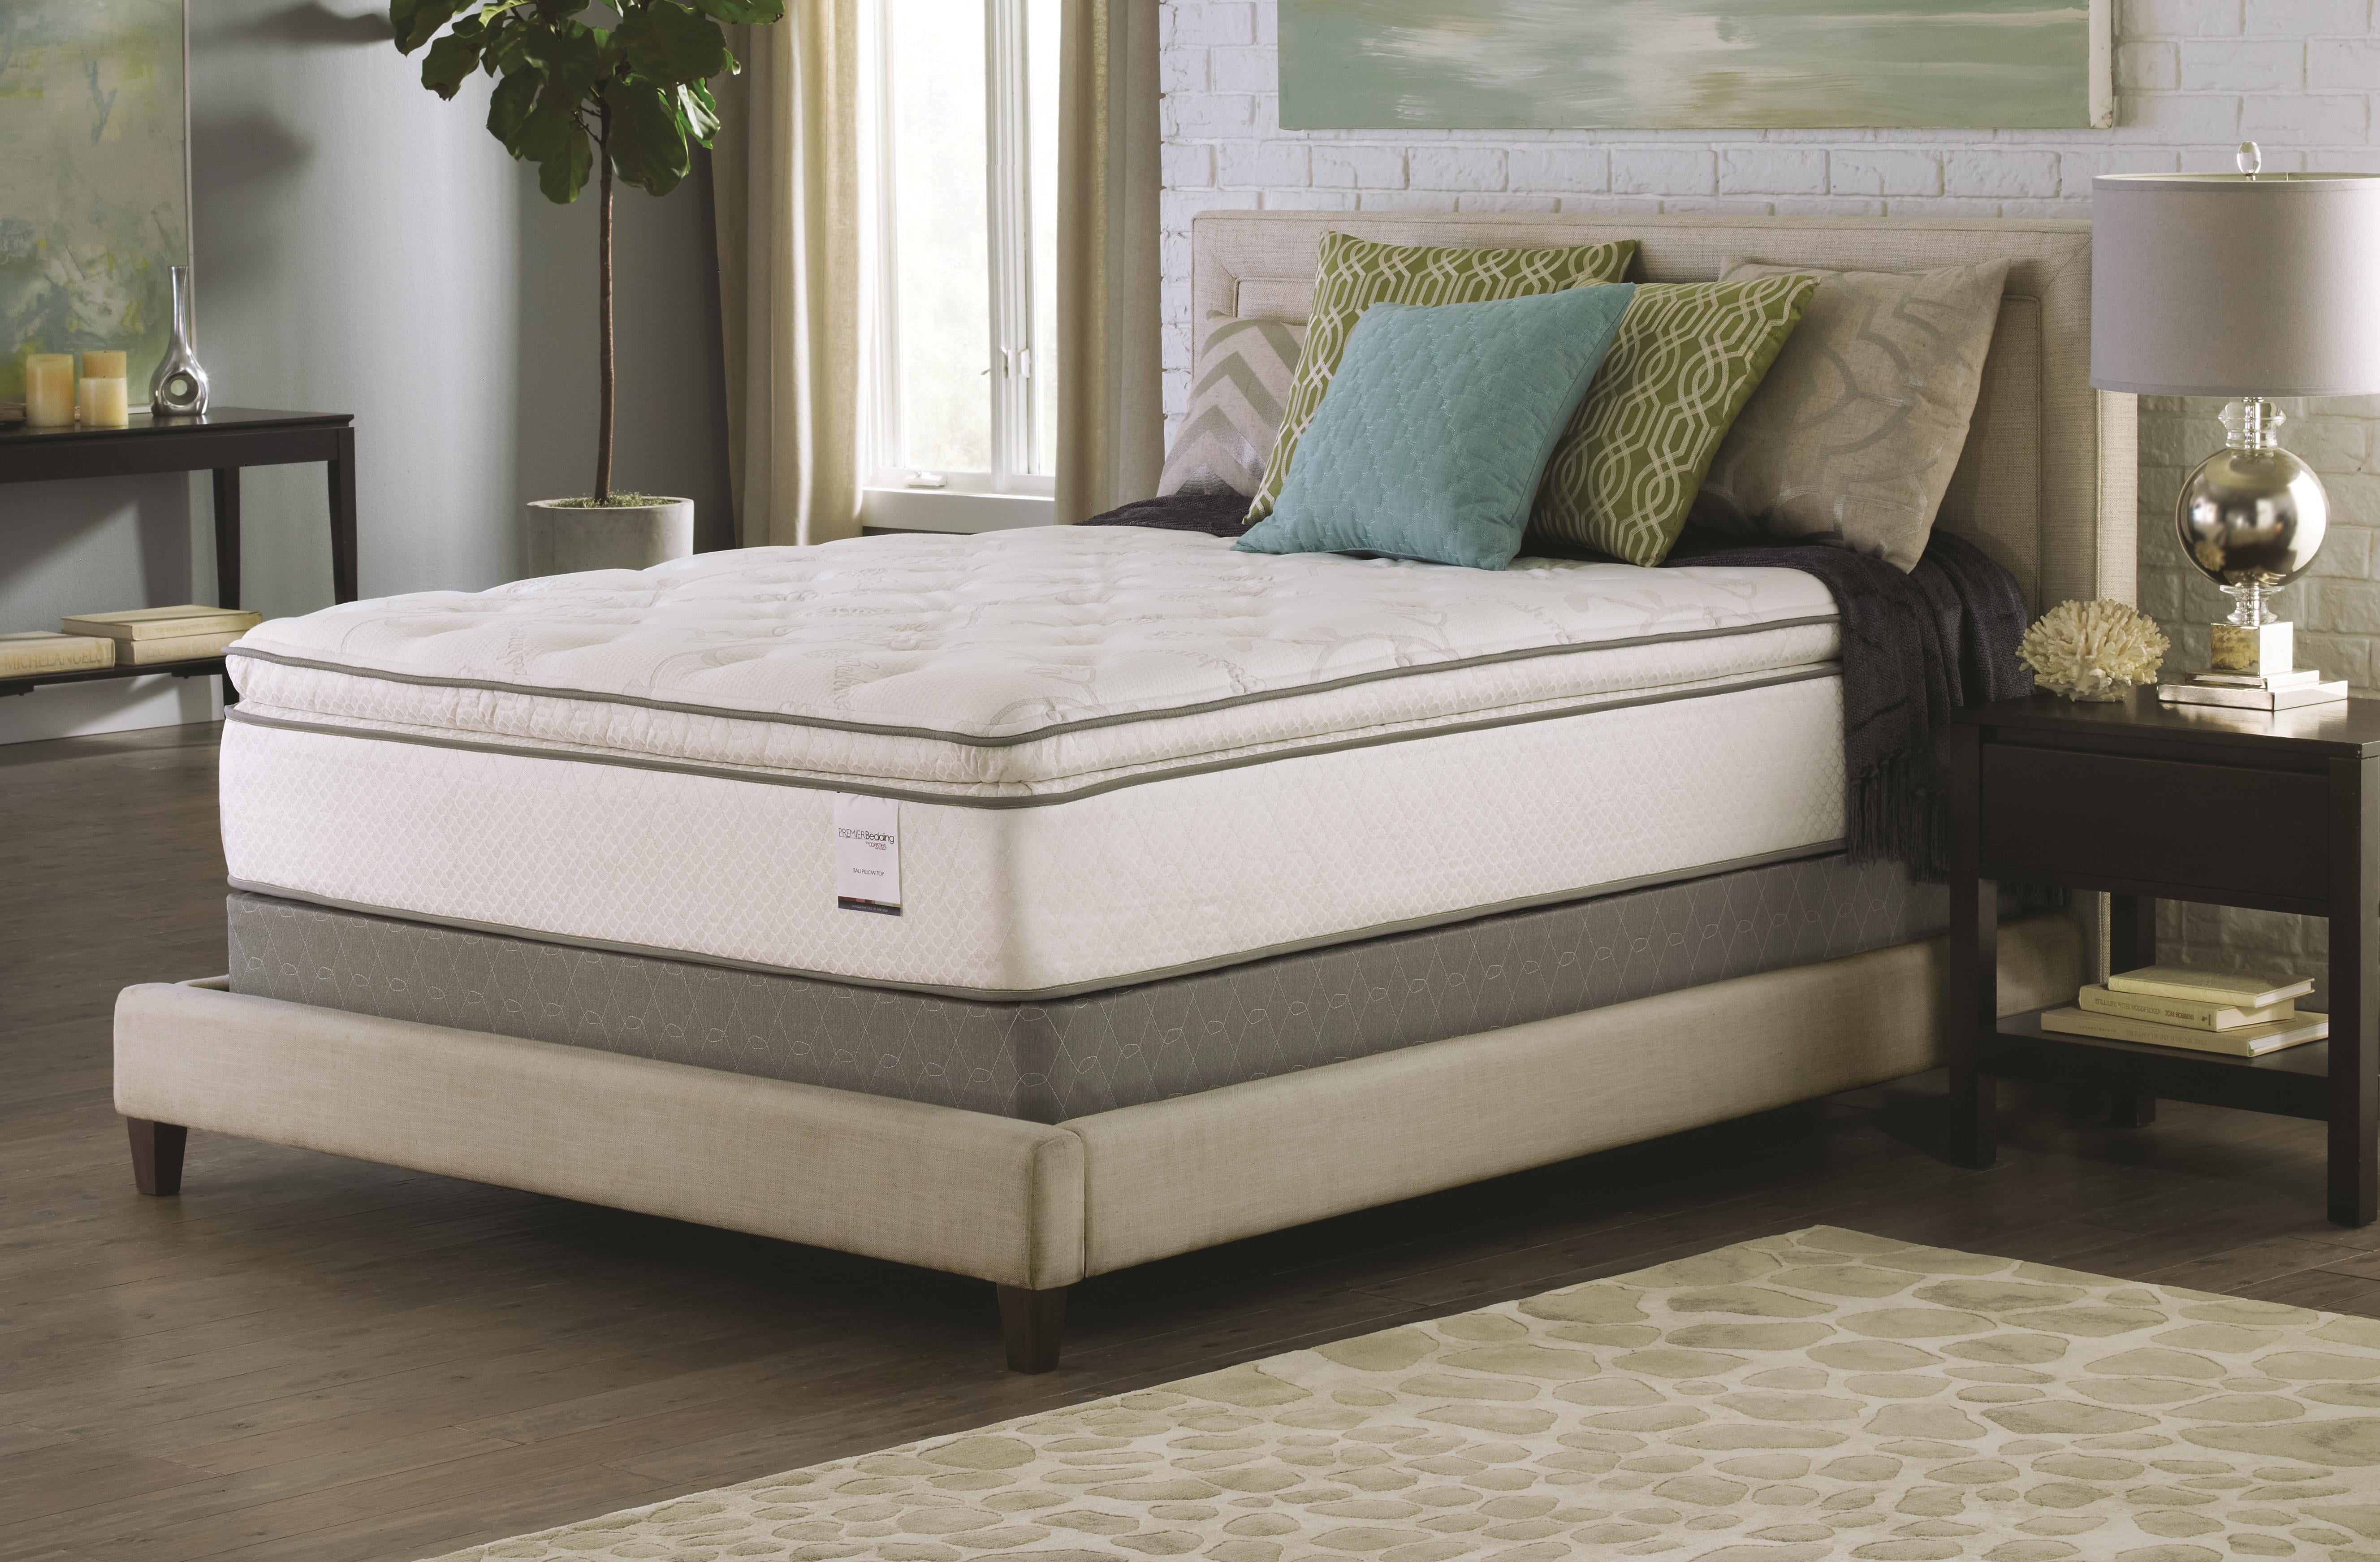 king pillow top mattress for sale moore ok